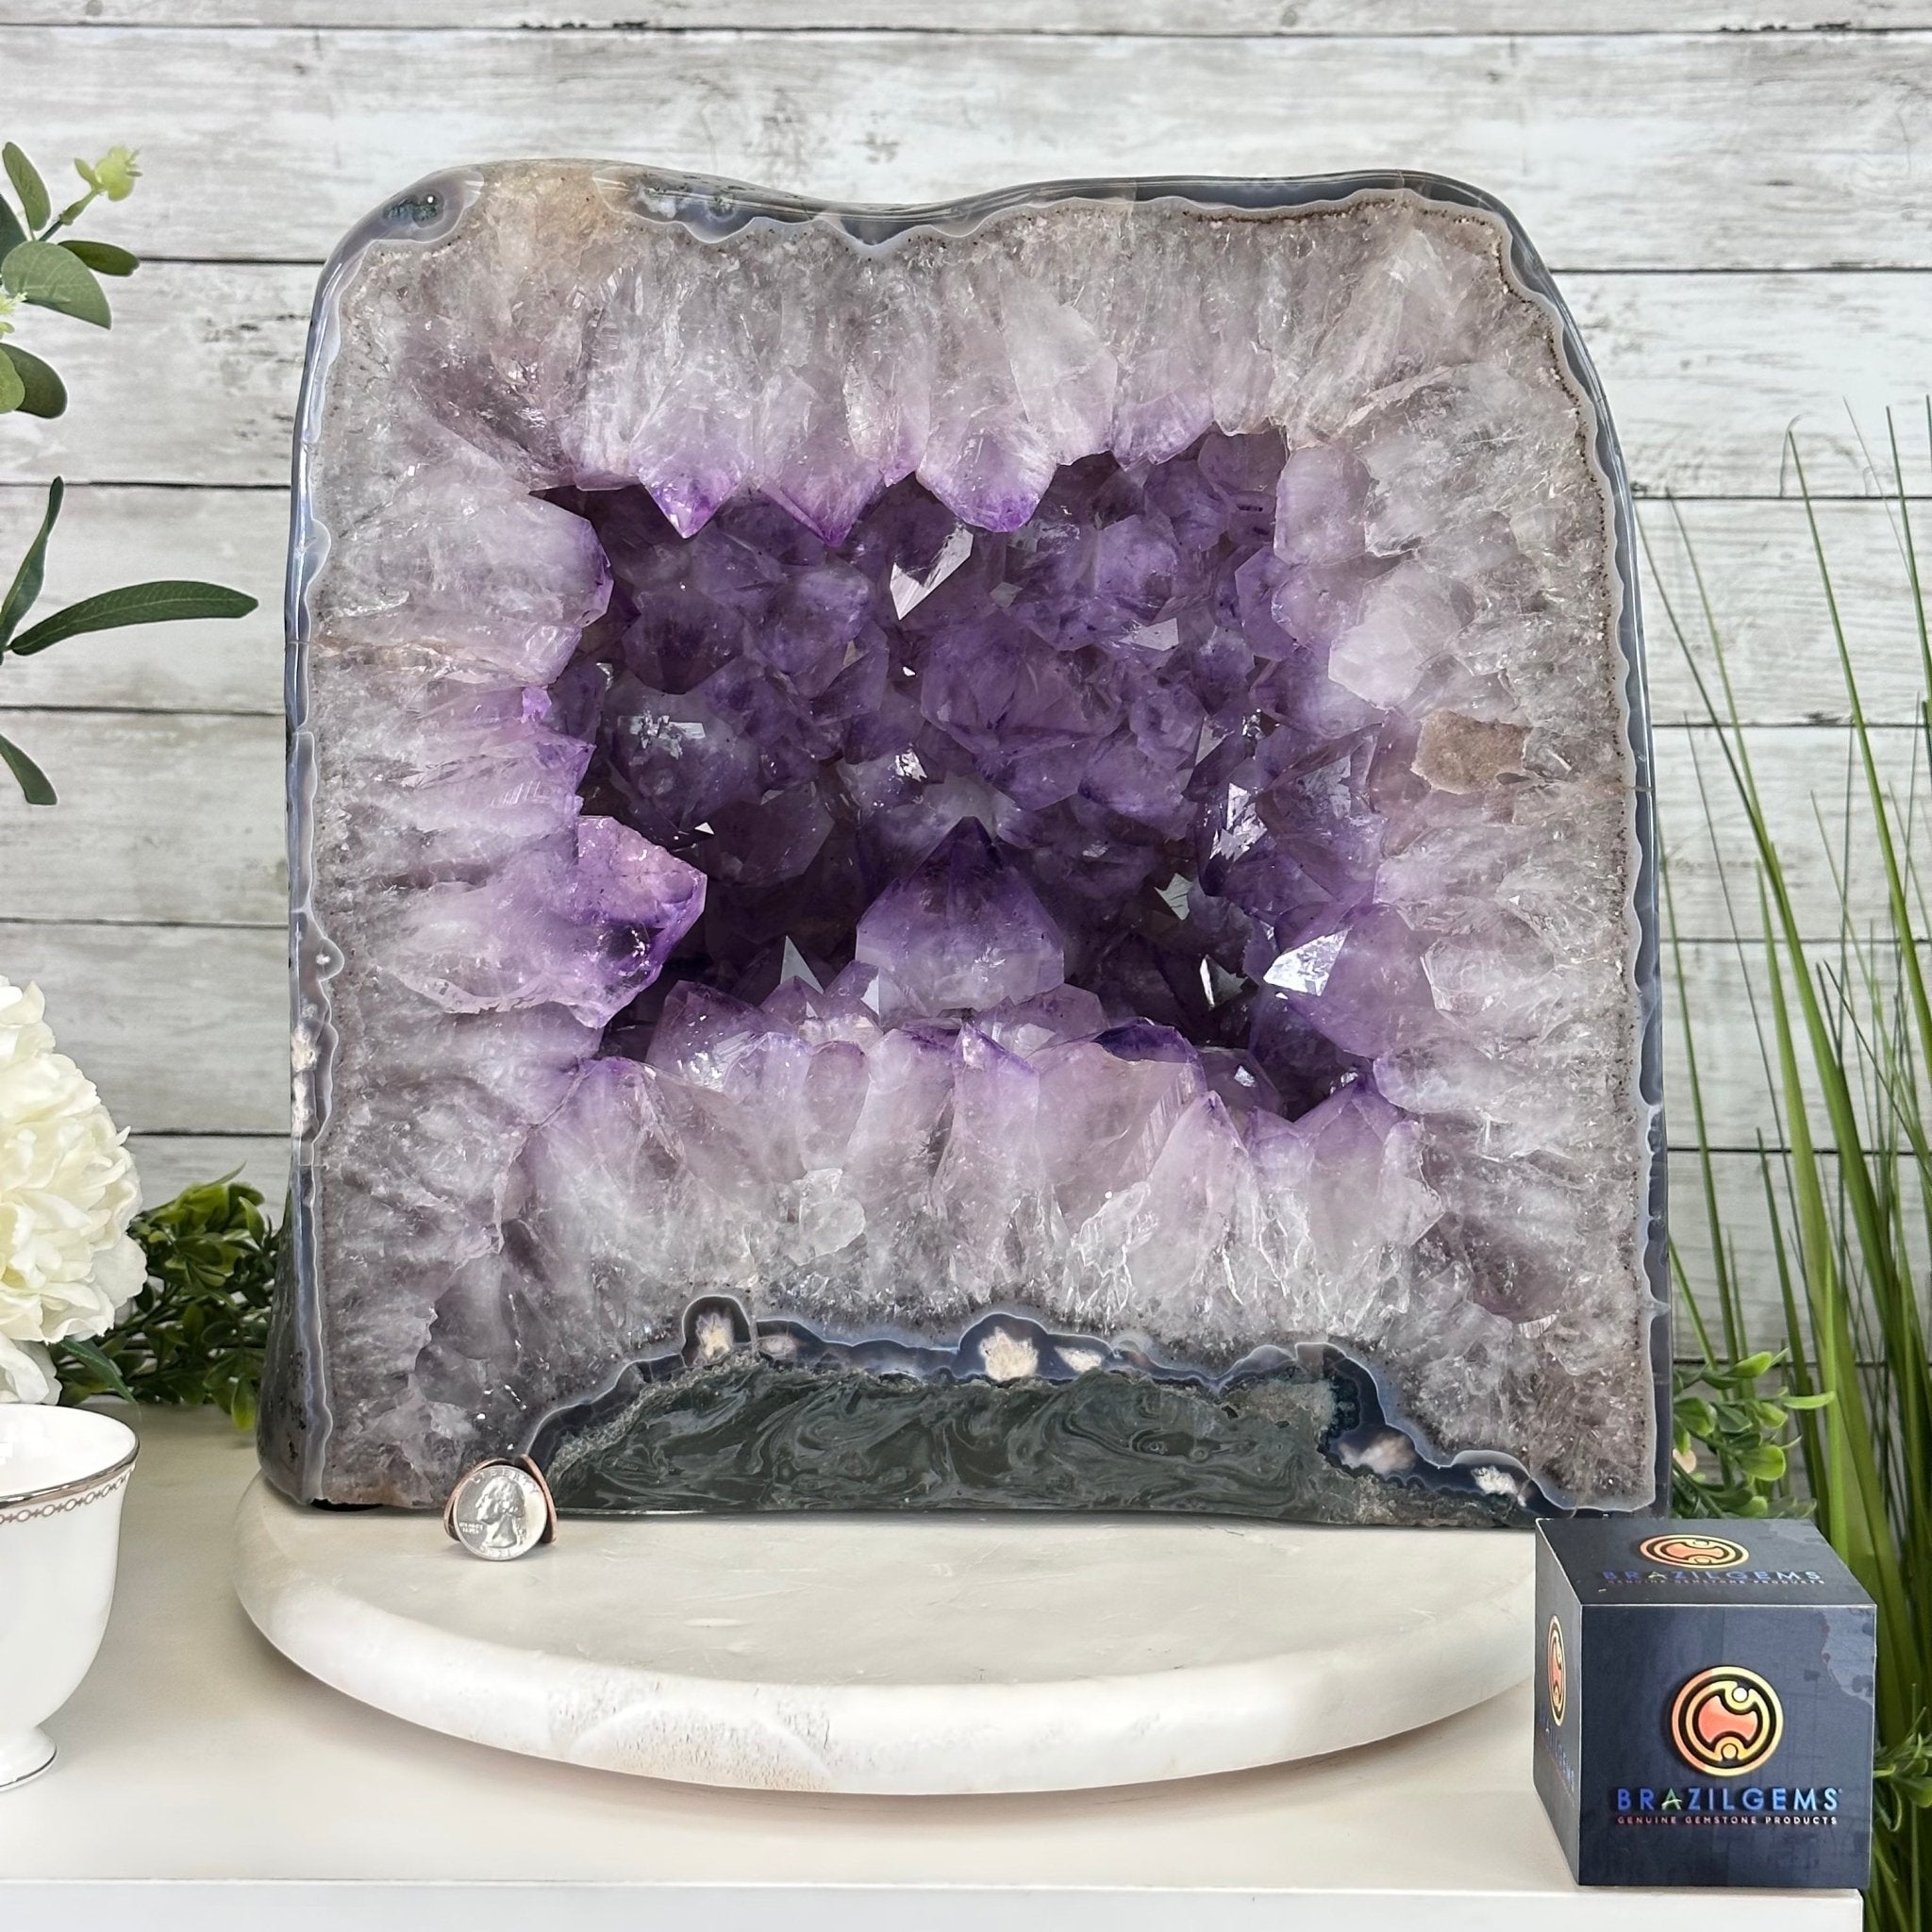 Extra Quality Polished Brazilian Amethyst Cathedral, 85.7 lbs & 13.9" tall Model #5602-0018 by Brazil Gems - Brazil GemsBrazil GemsExtra Quality Polished Brazilian Amethyst Cathedral, 85.7 lbs & 13.9" tall Model #5602-0018 by Brazil GemsPolished Cathedrals5602-0018